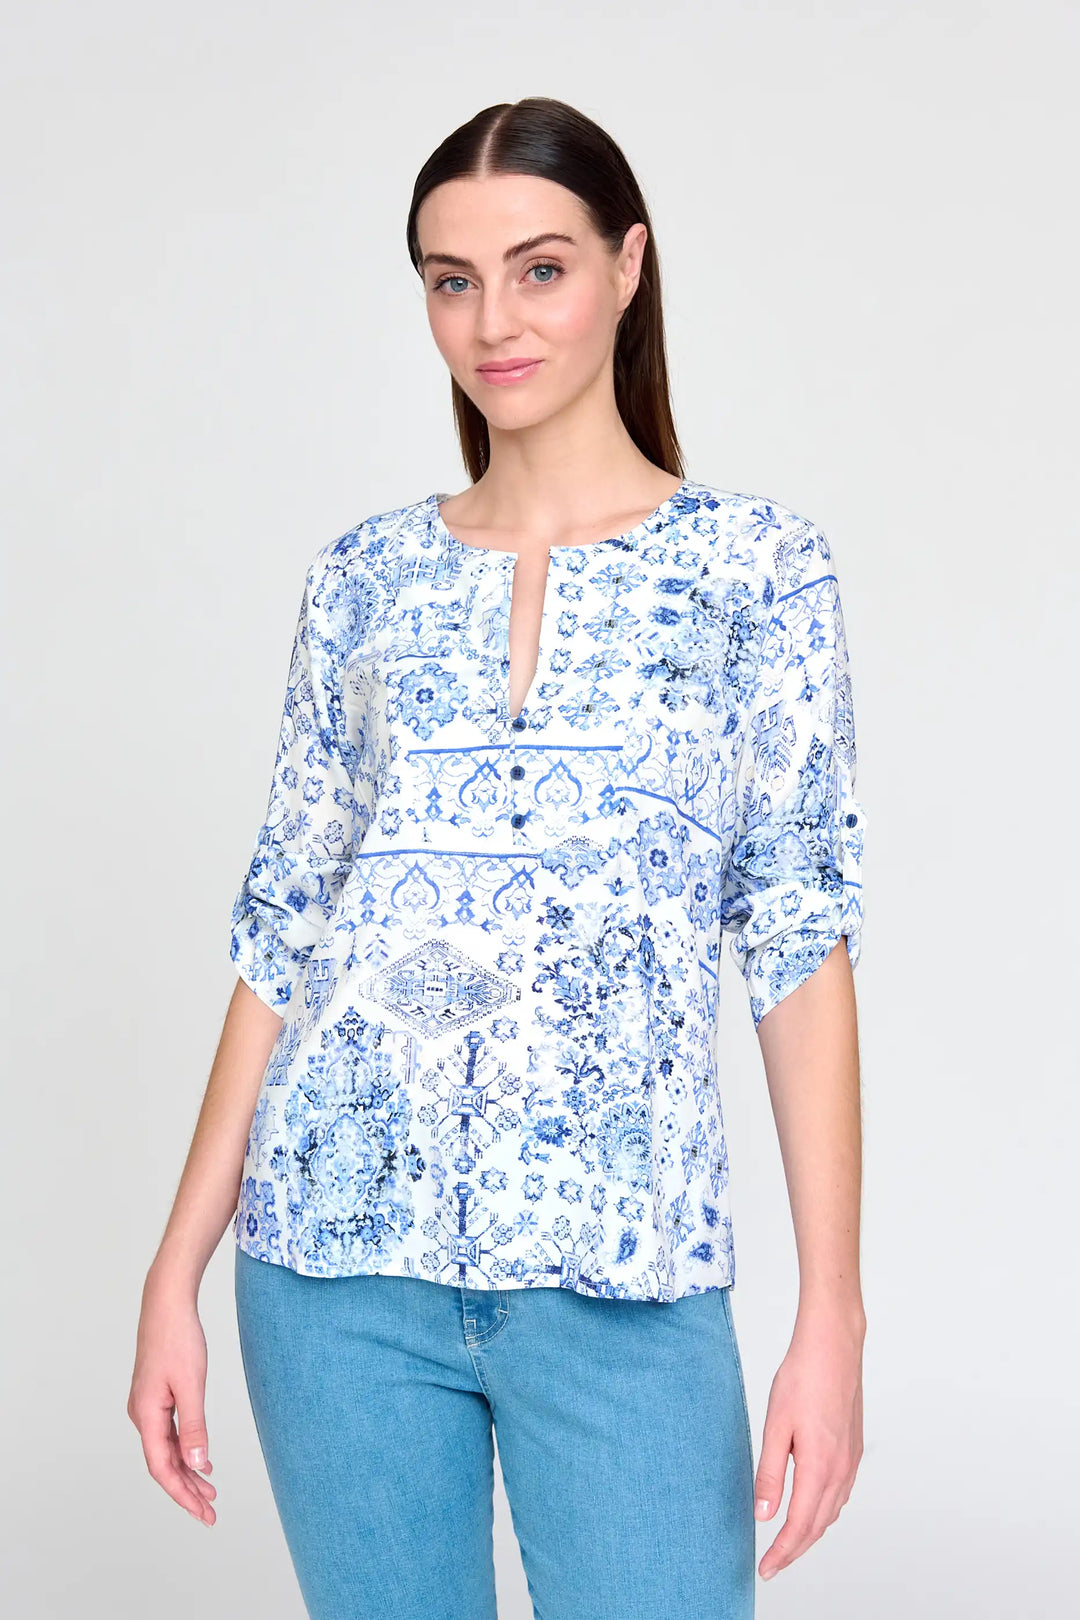 Model showcases 'Acra' style blouse featuring blue and white porcelain print, 3/4 sleeves, and keyhole neckline, complemented by casual light blue jeans.